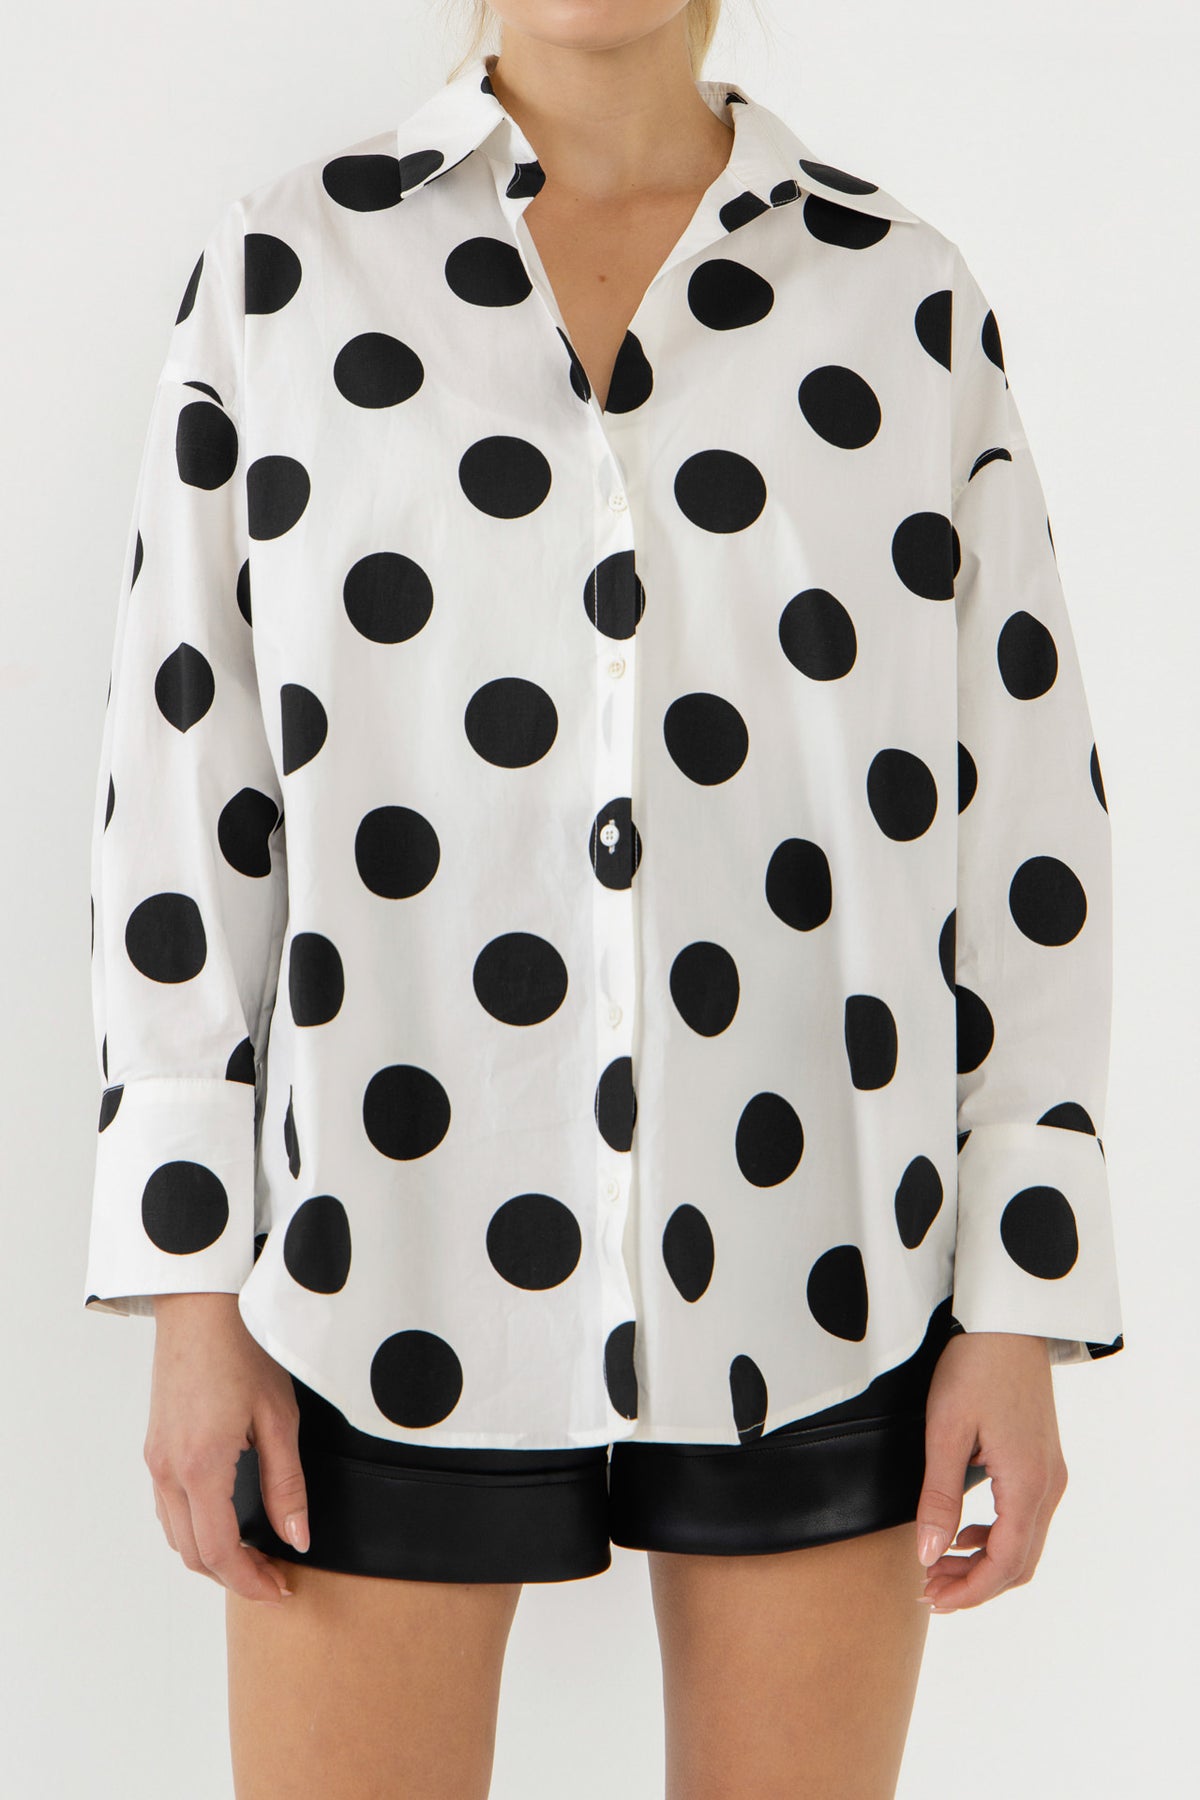 GREY LAB - Oversized Polka Dotted Shirt - TOPS available at Objectrare